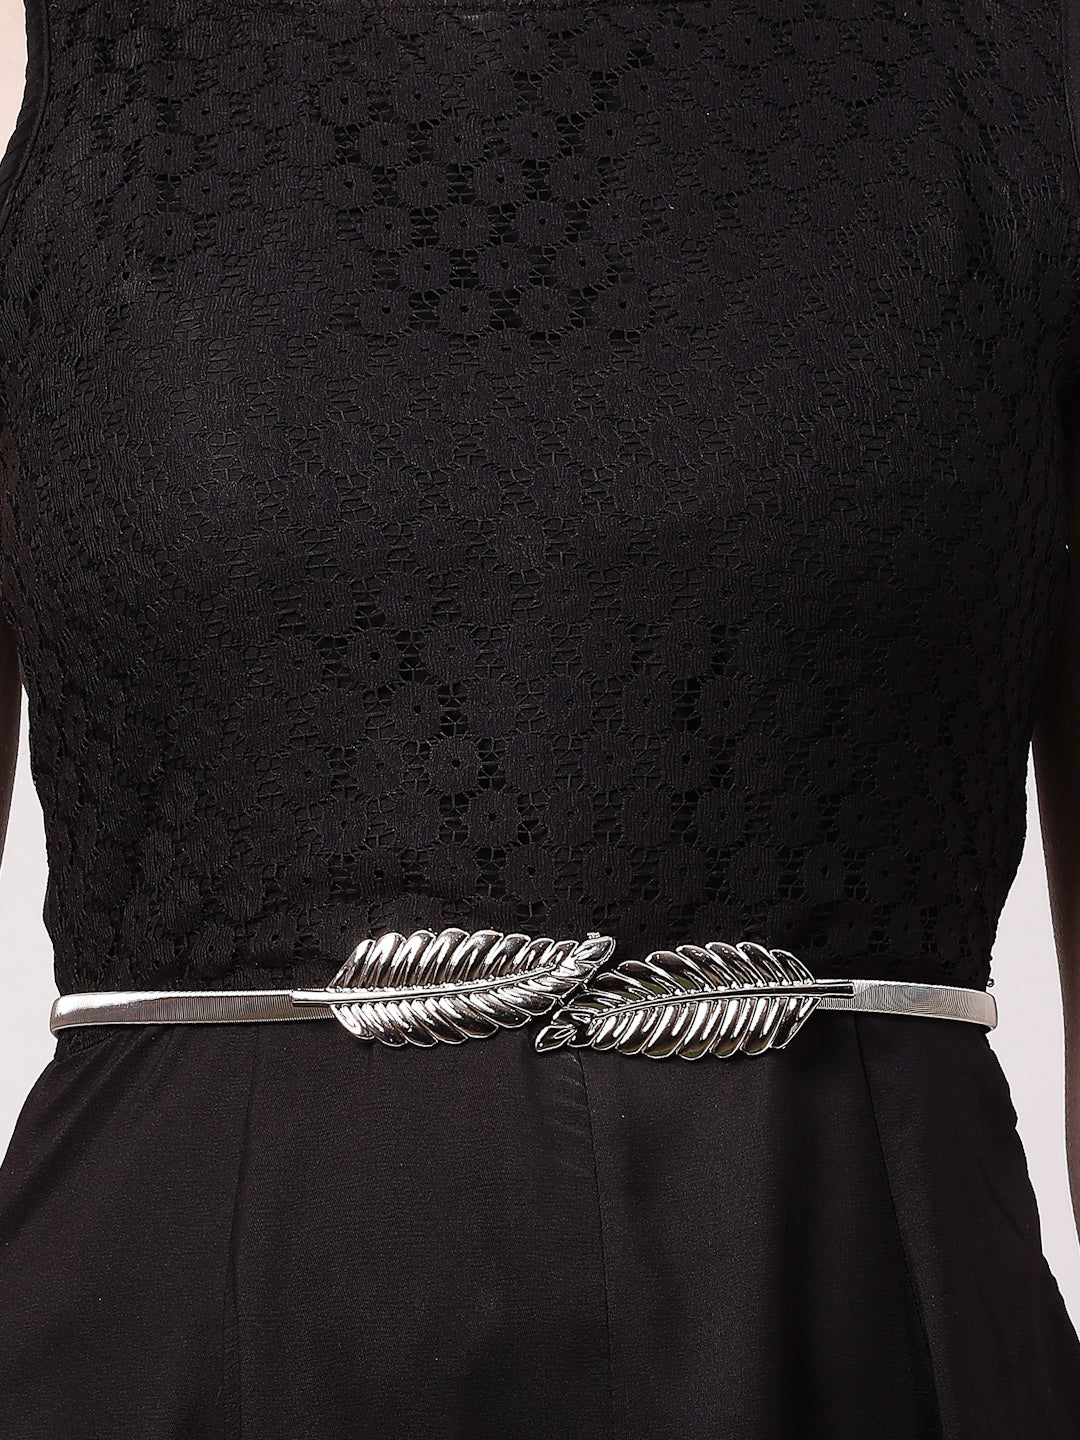 Women's circular silver plated stretchable metal belt - NVR